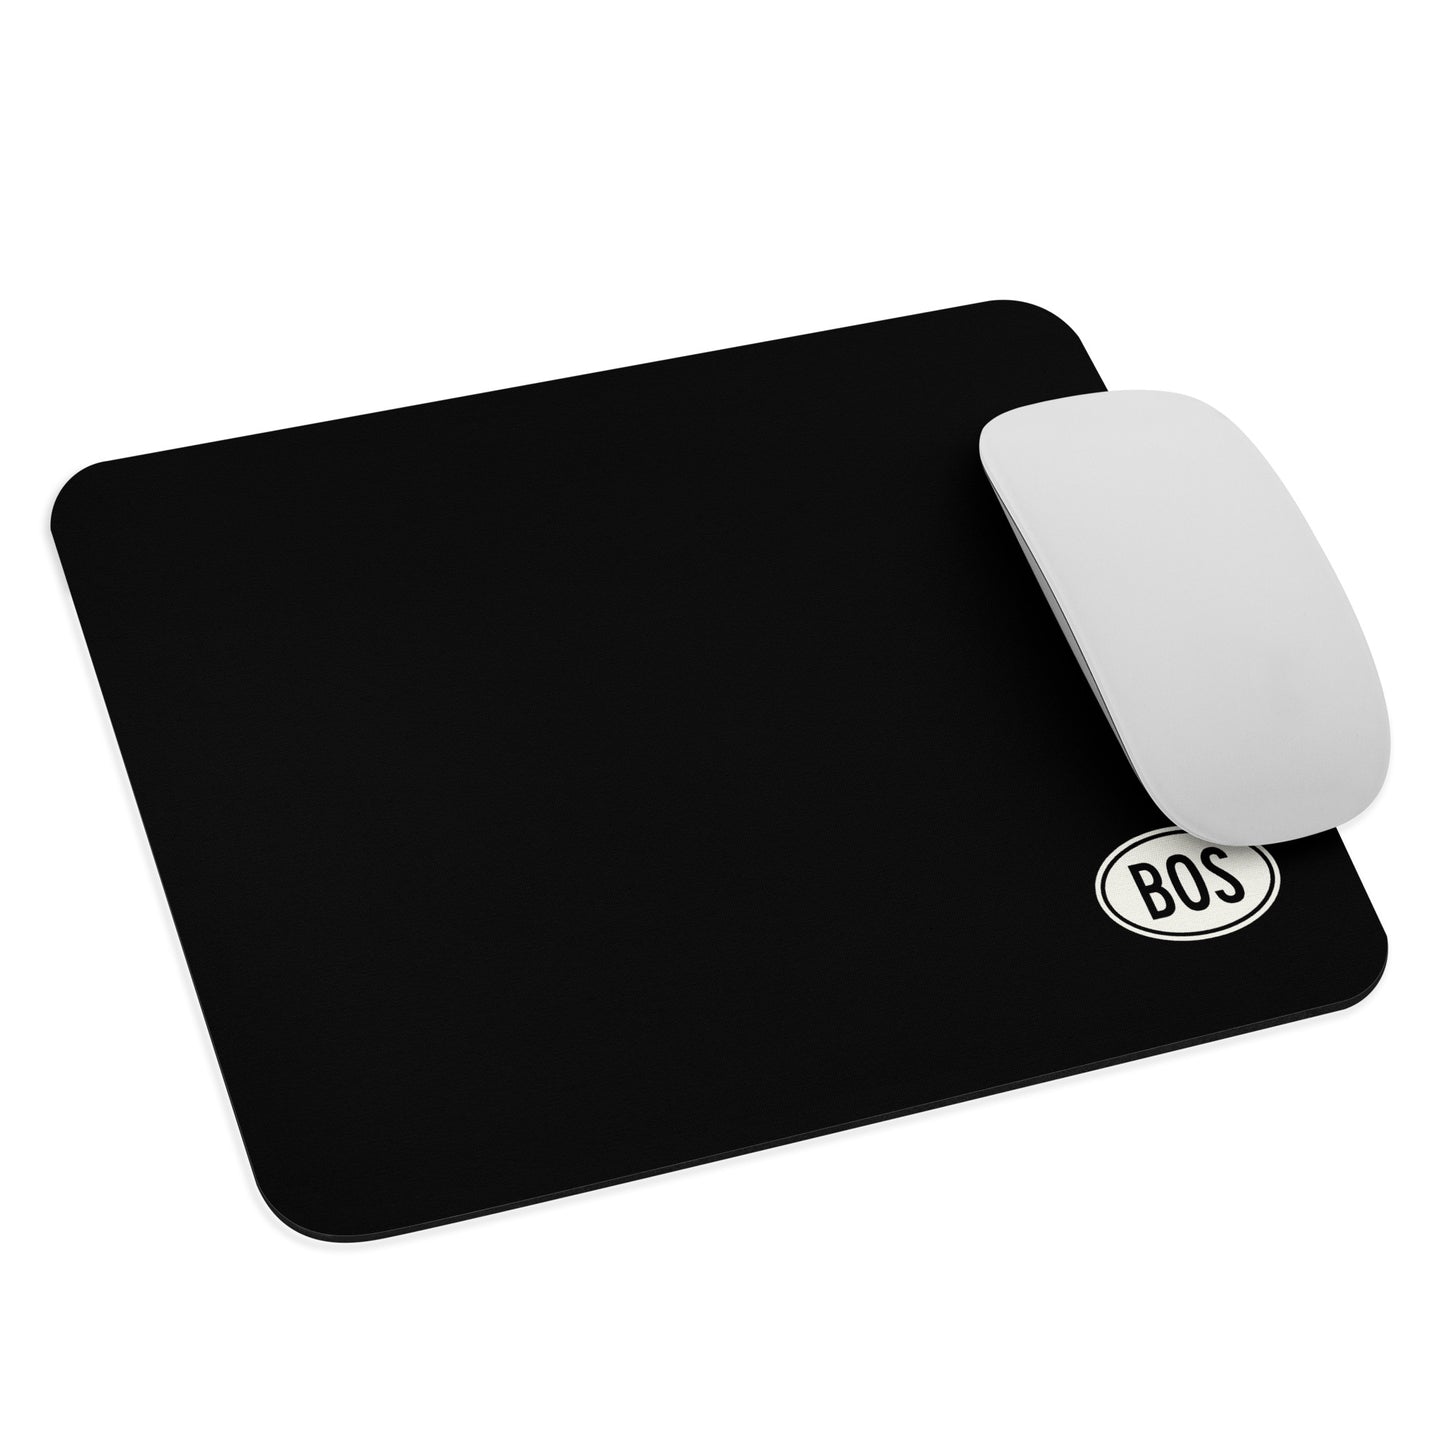 Unique Travel Gift Mouse Pad - White Oval • BOS Boston • YHM Designs - Image 03